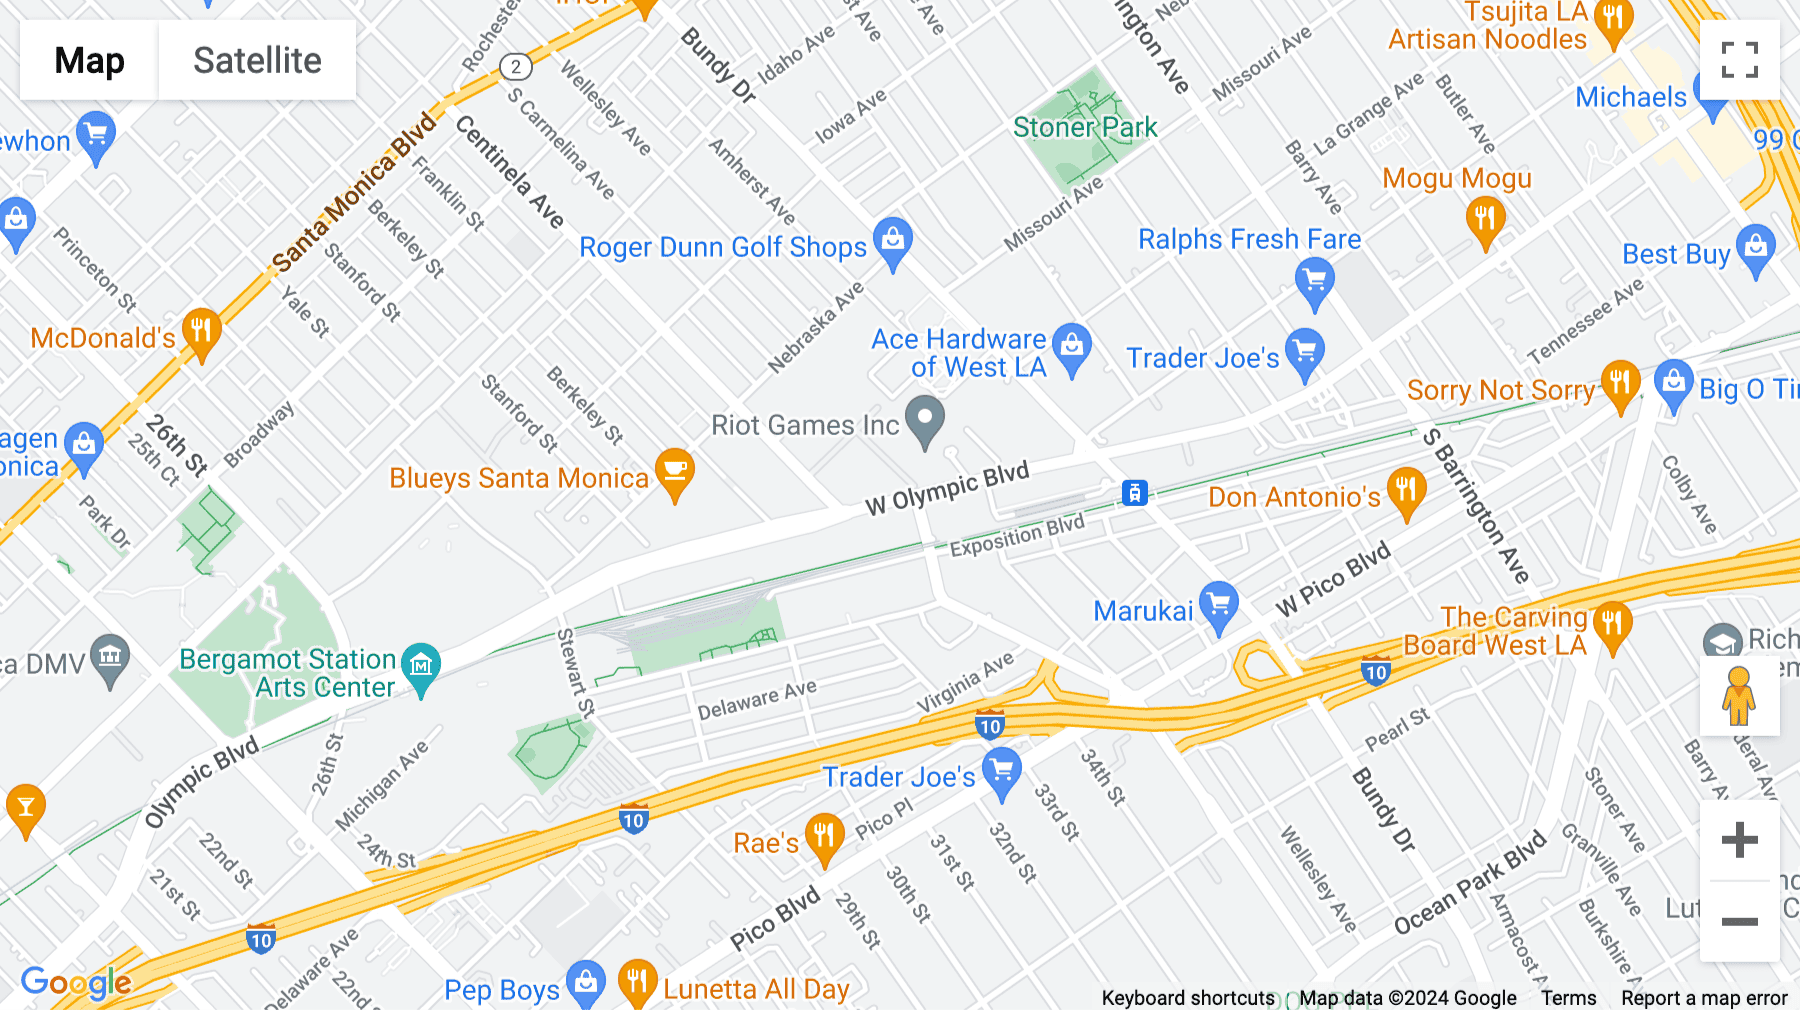 Click for interative map of 11500 Olympic Blvd., Olympic Plaza, Suite 400, Los Angeles